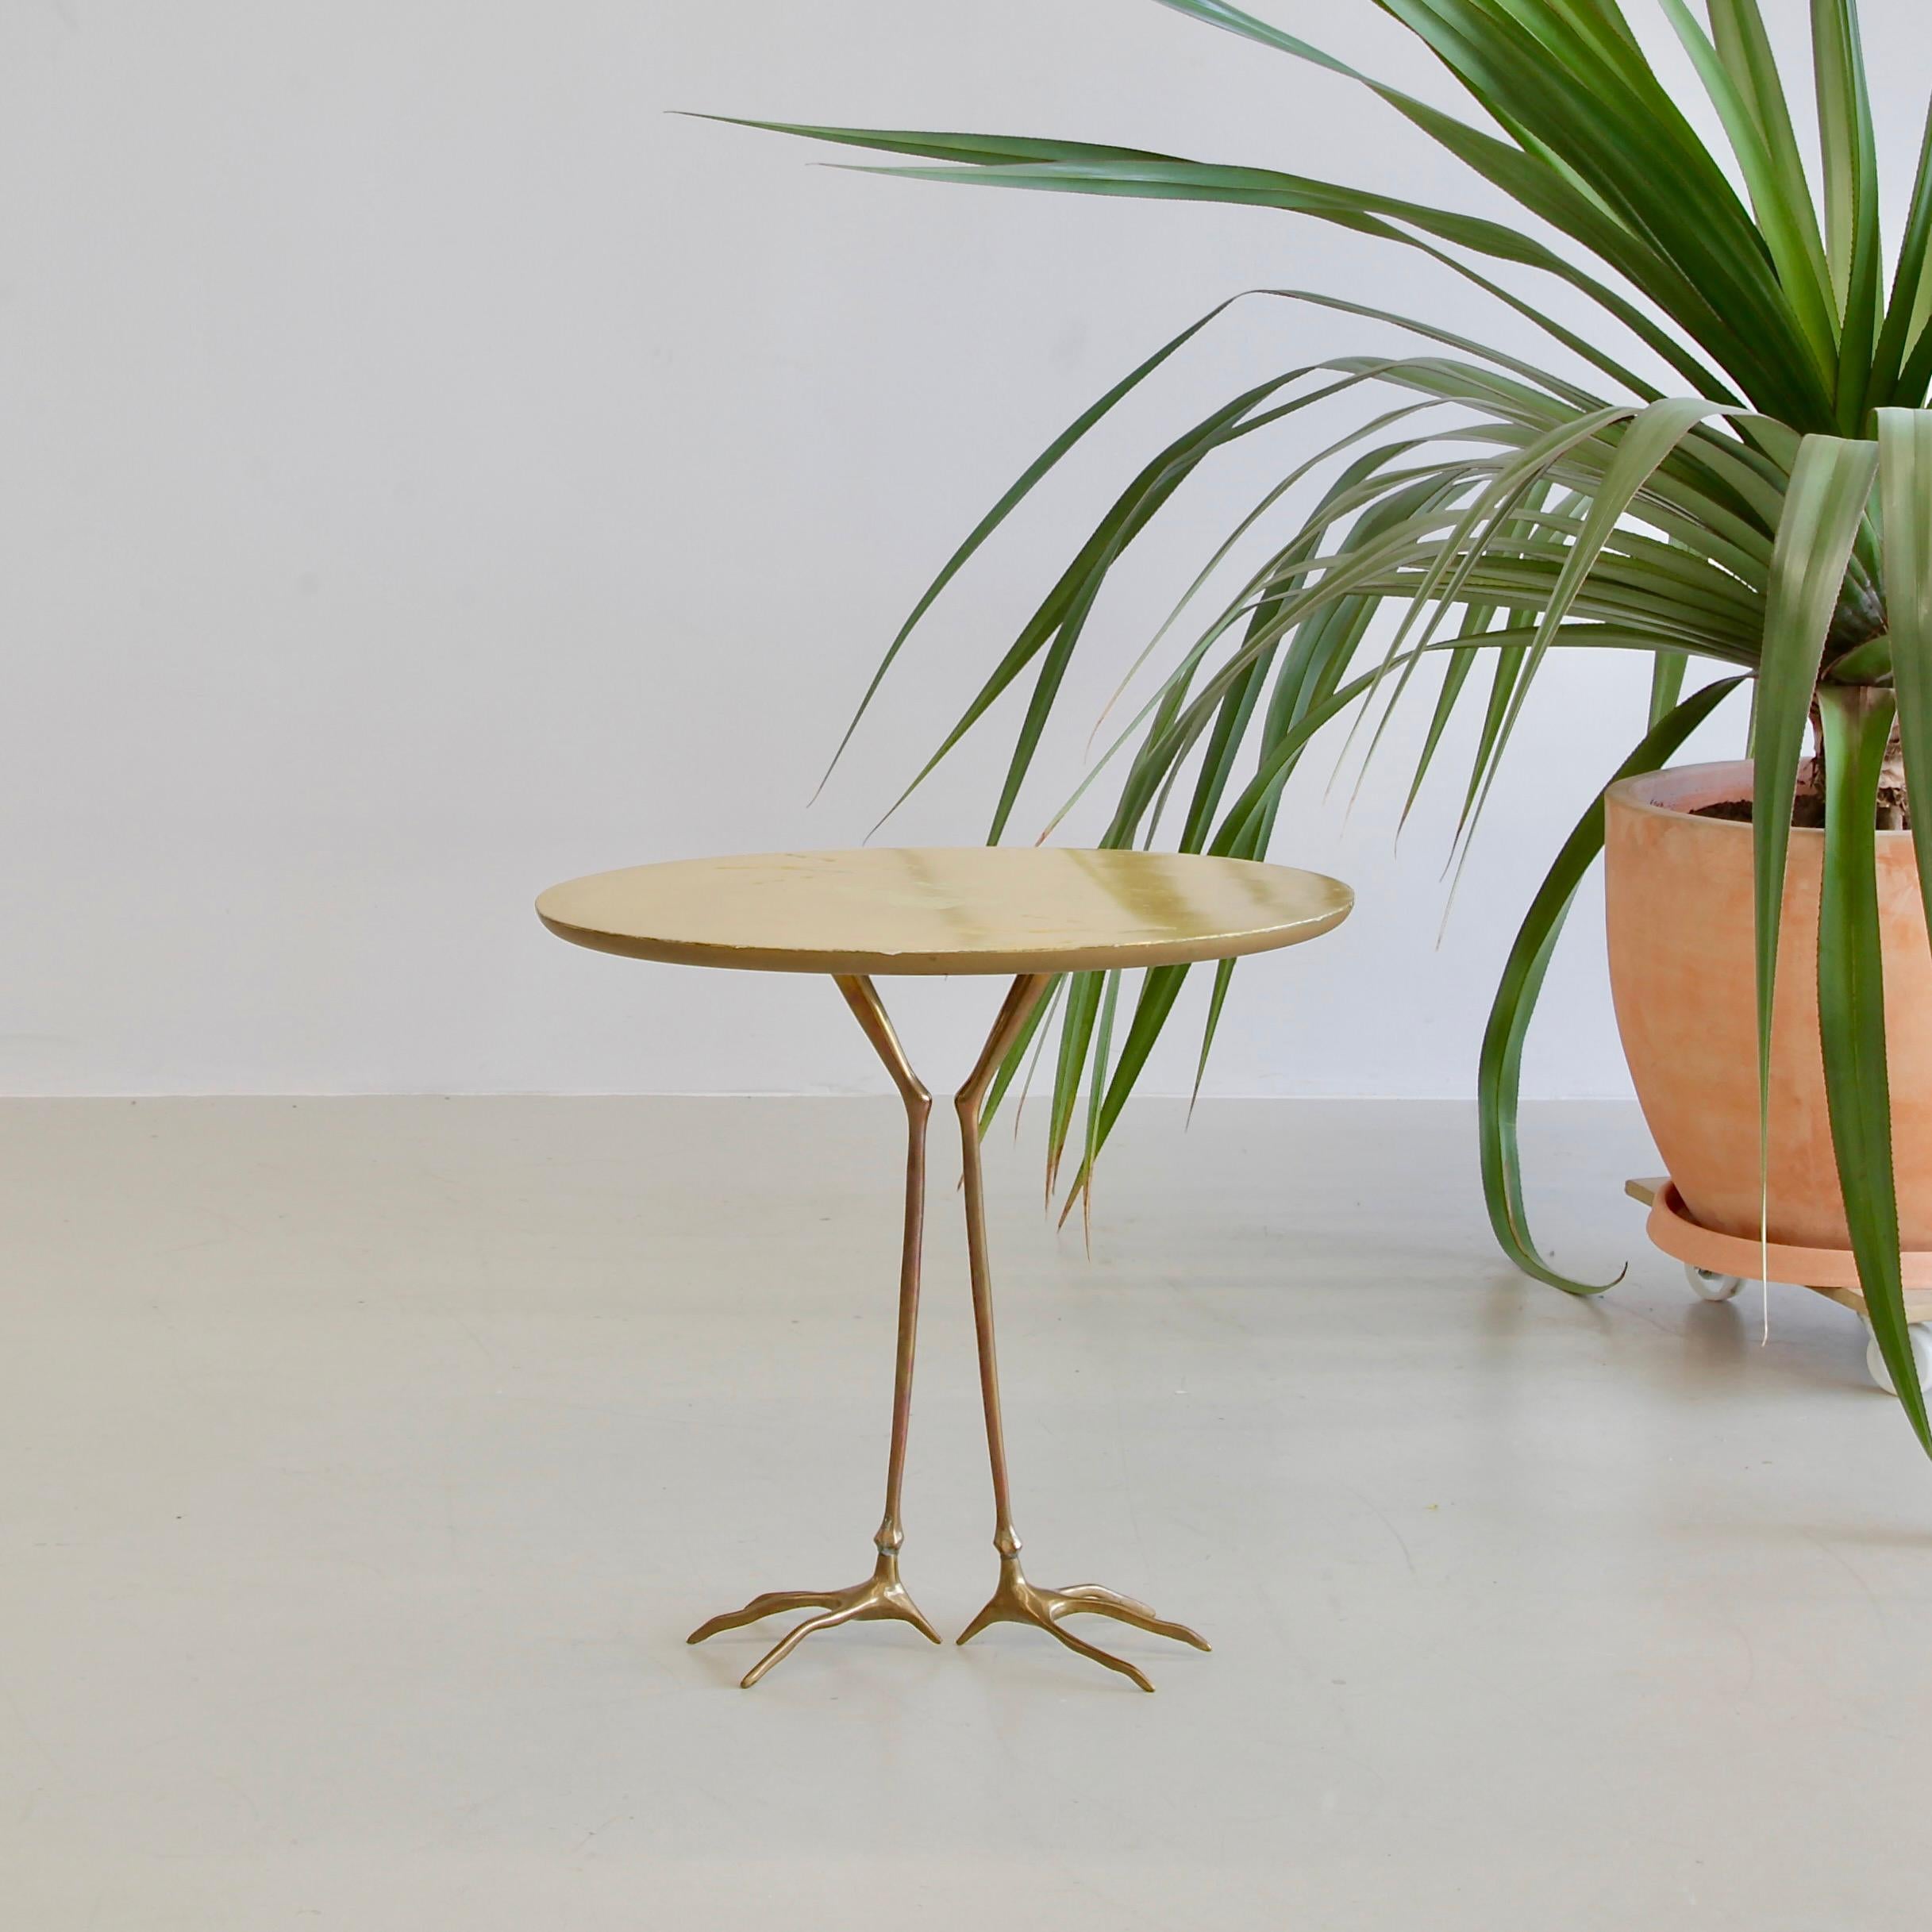 Italian Traccia Table by Meret Oppenheim, 1970s For Sale